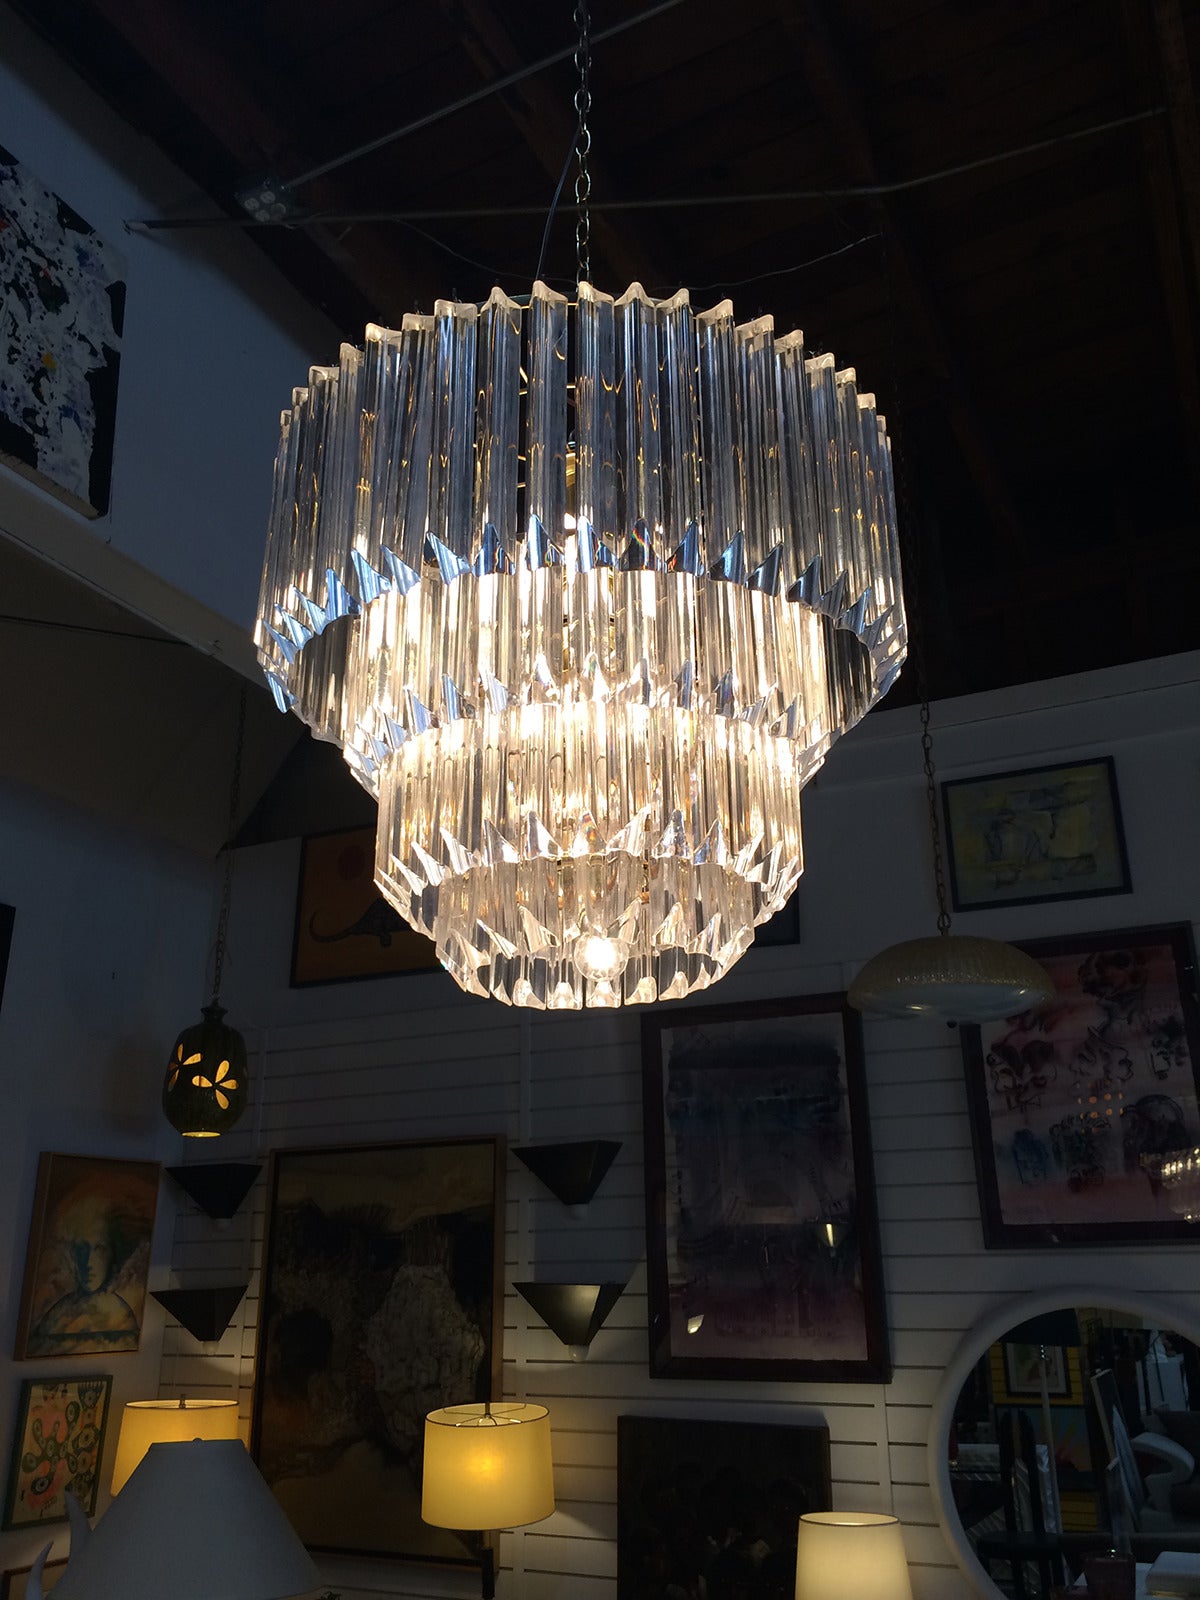 This is a large, four tiered, lucite chandelier.   Fixture is constructed with brass internal framework and 11 bulbs - two rows of five and a single bulb on the bottom. Measures 24"  across without the chain.